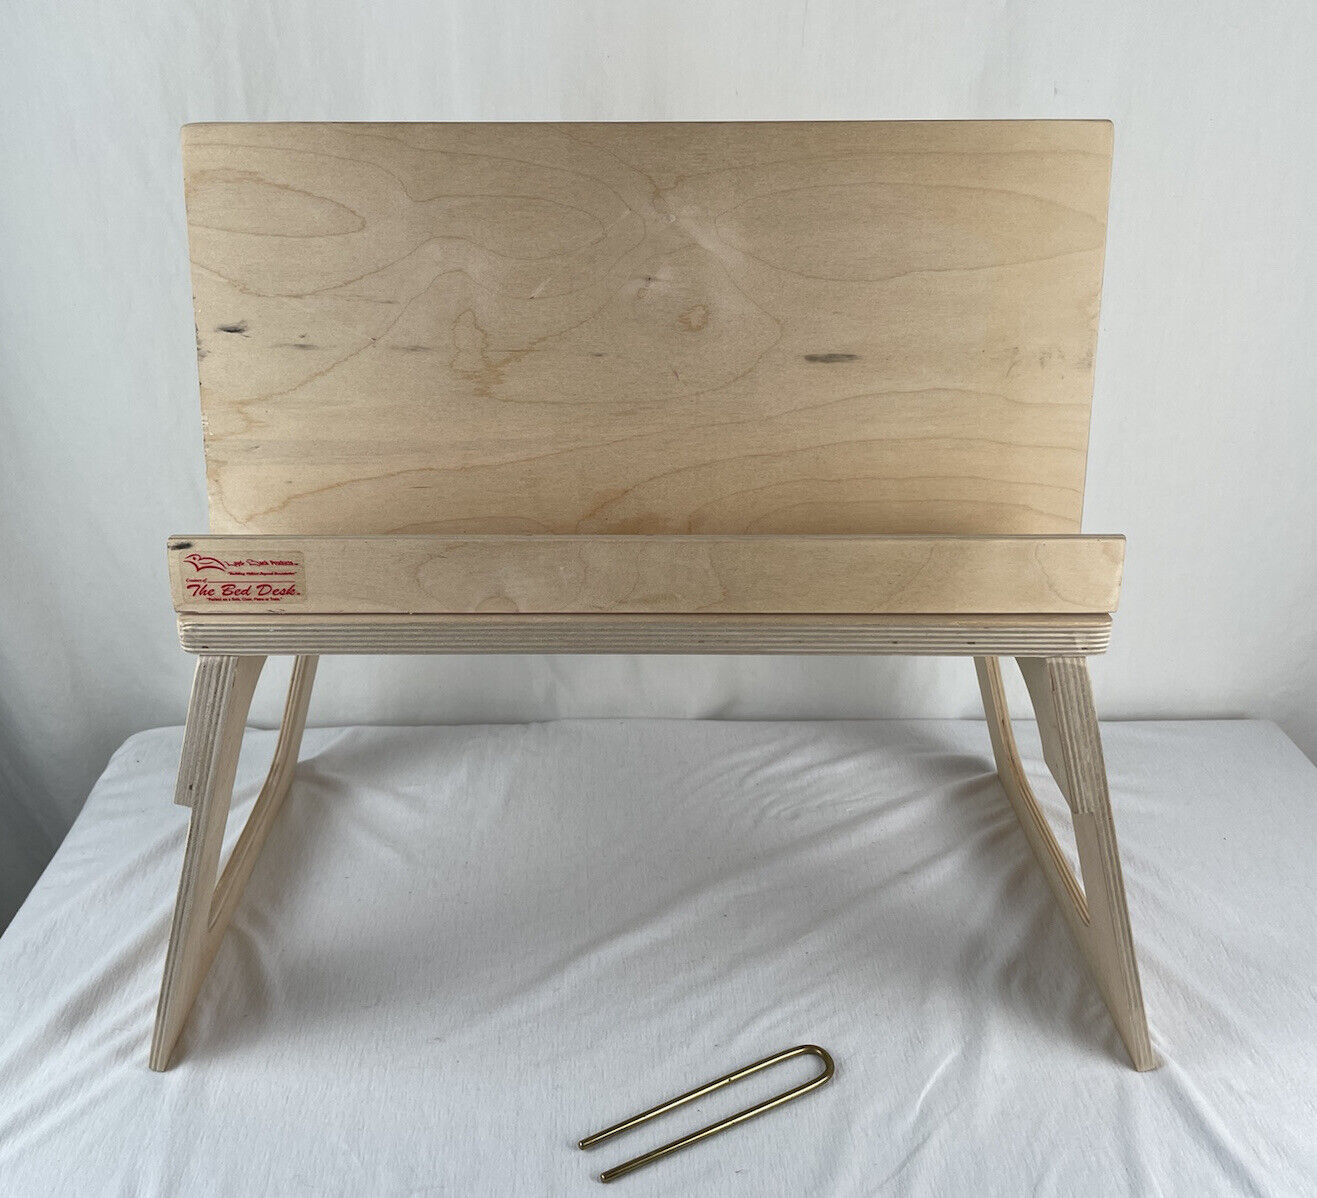 The Bed Desk by Layd Back Products 5 Positions 21+ Uses Birch Wood Made in USA